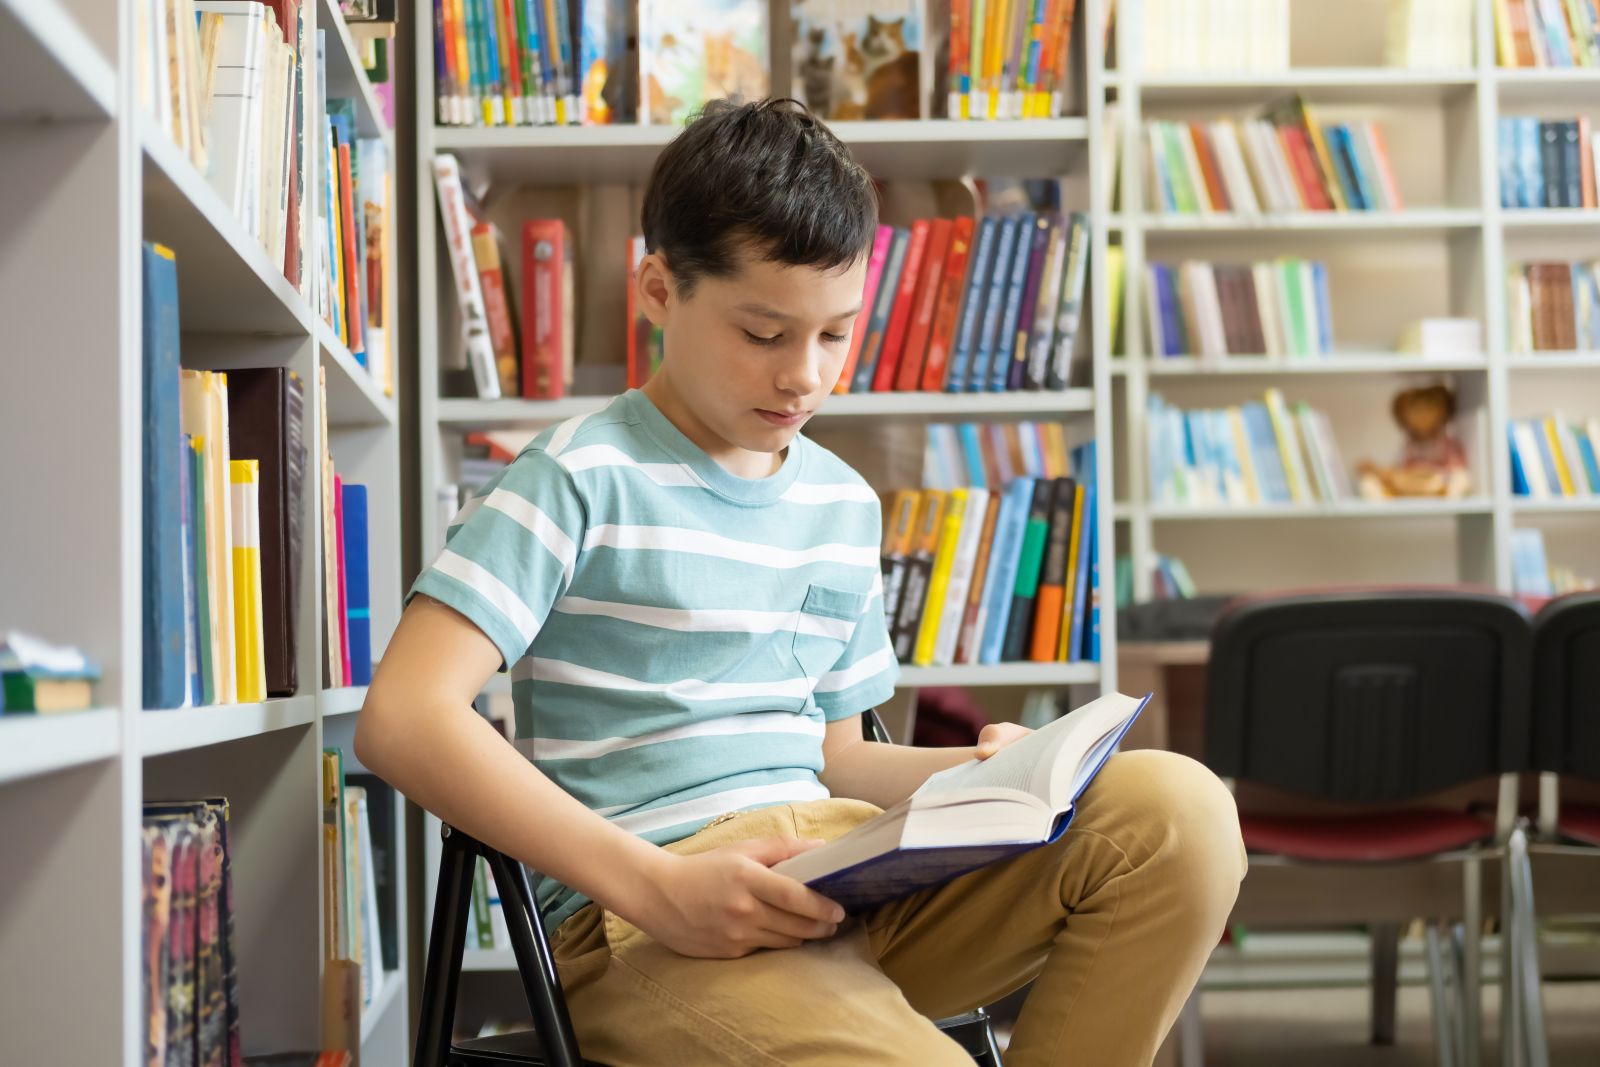 Reading levels are crucial in helping readers find books that match their abilities and promote growth